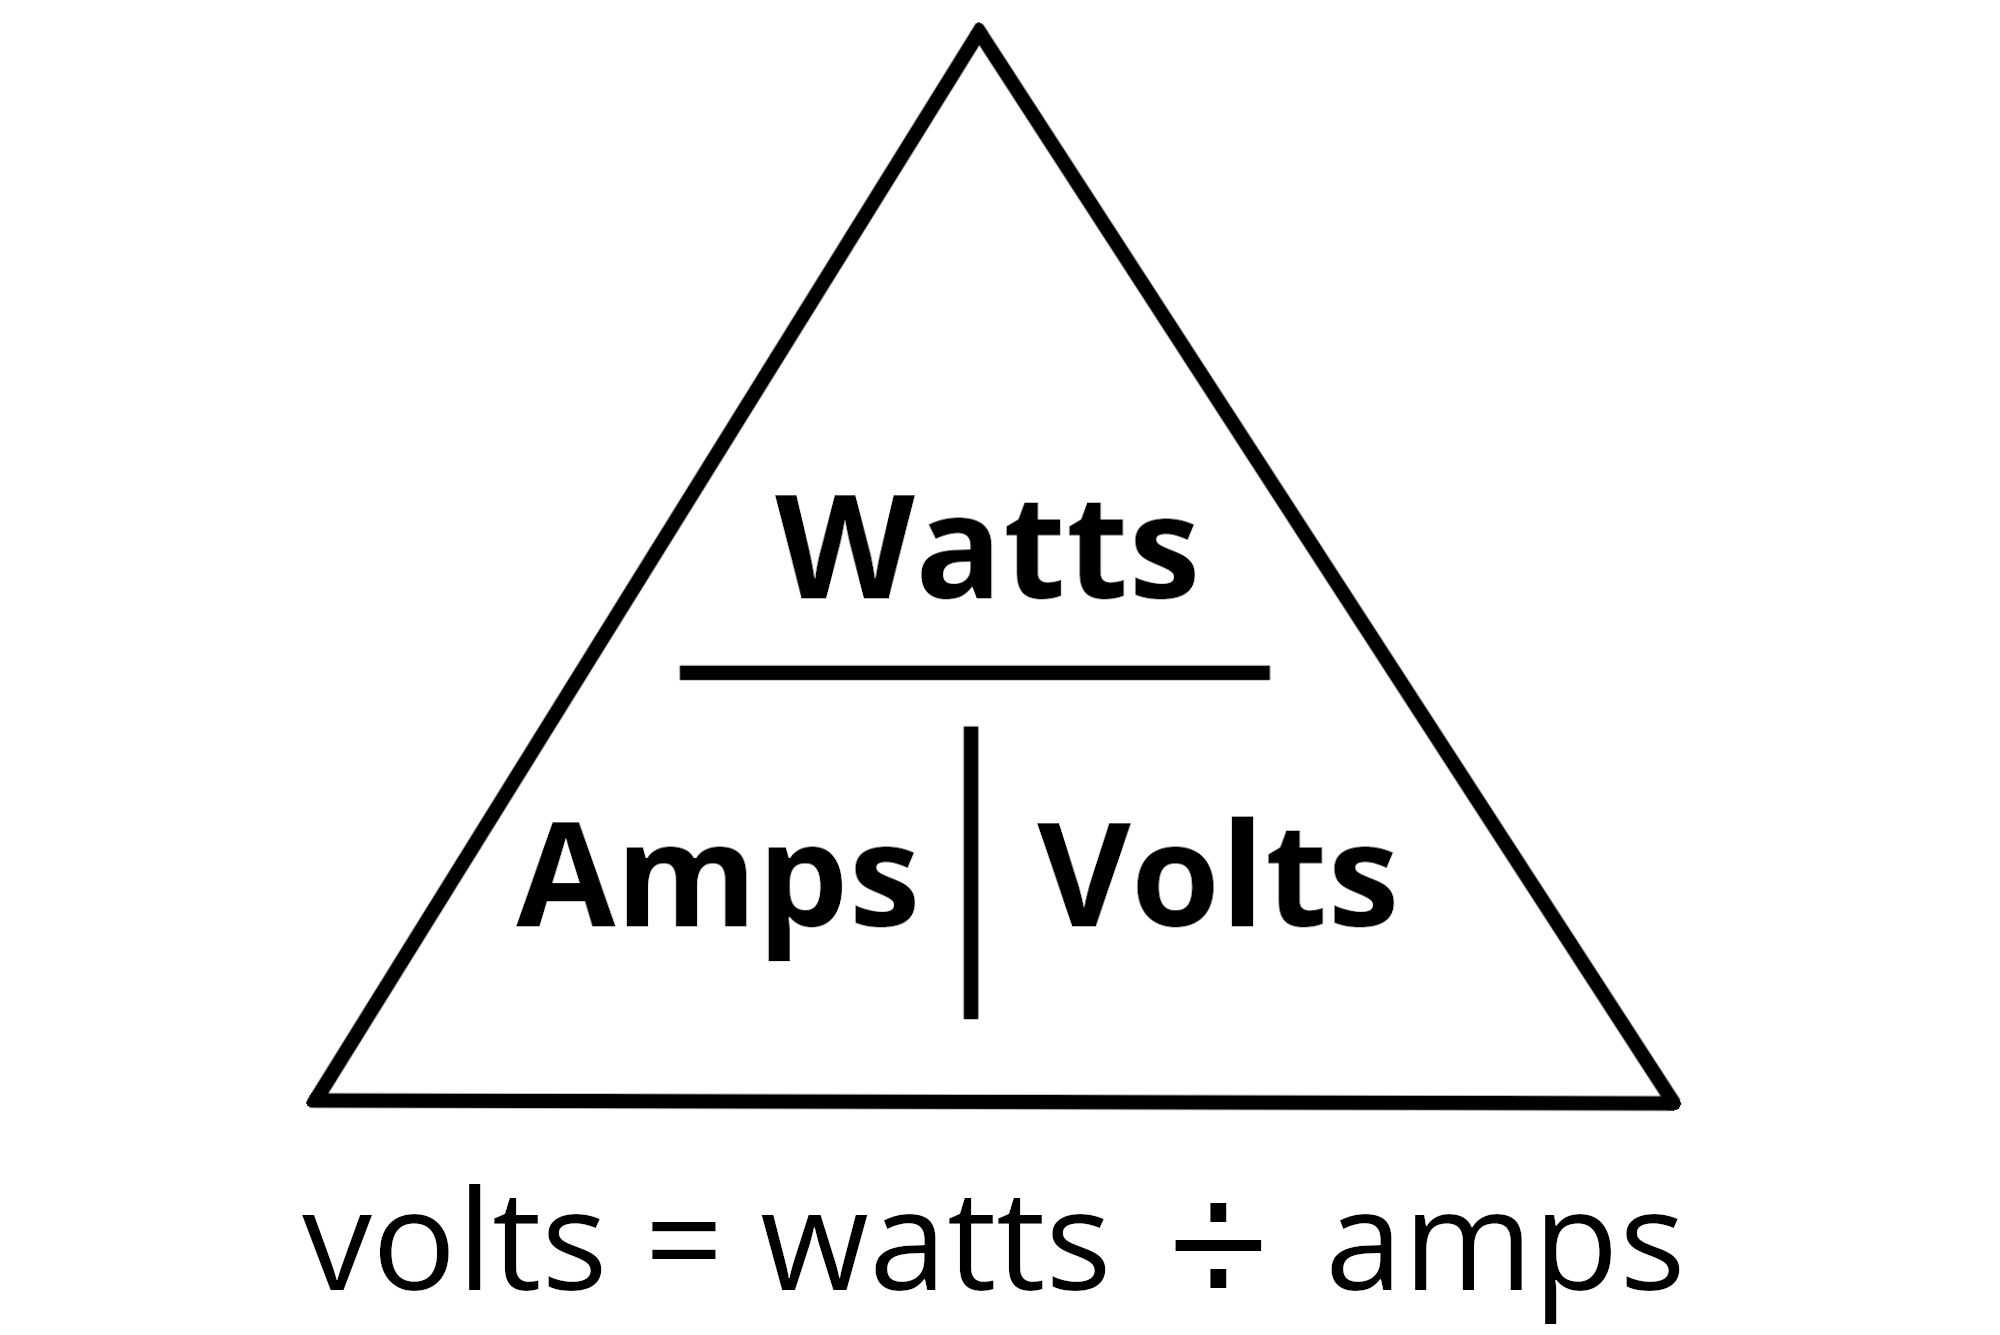 Power triangle illustrating the formula to convert watts to volts with volts being equal to watts divided by amps